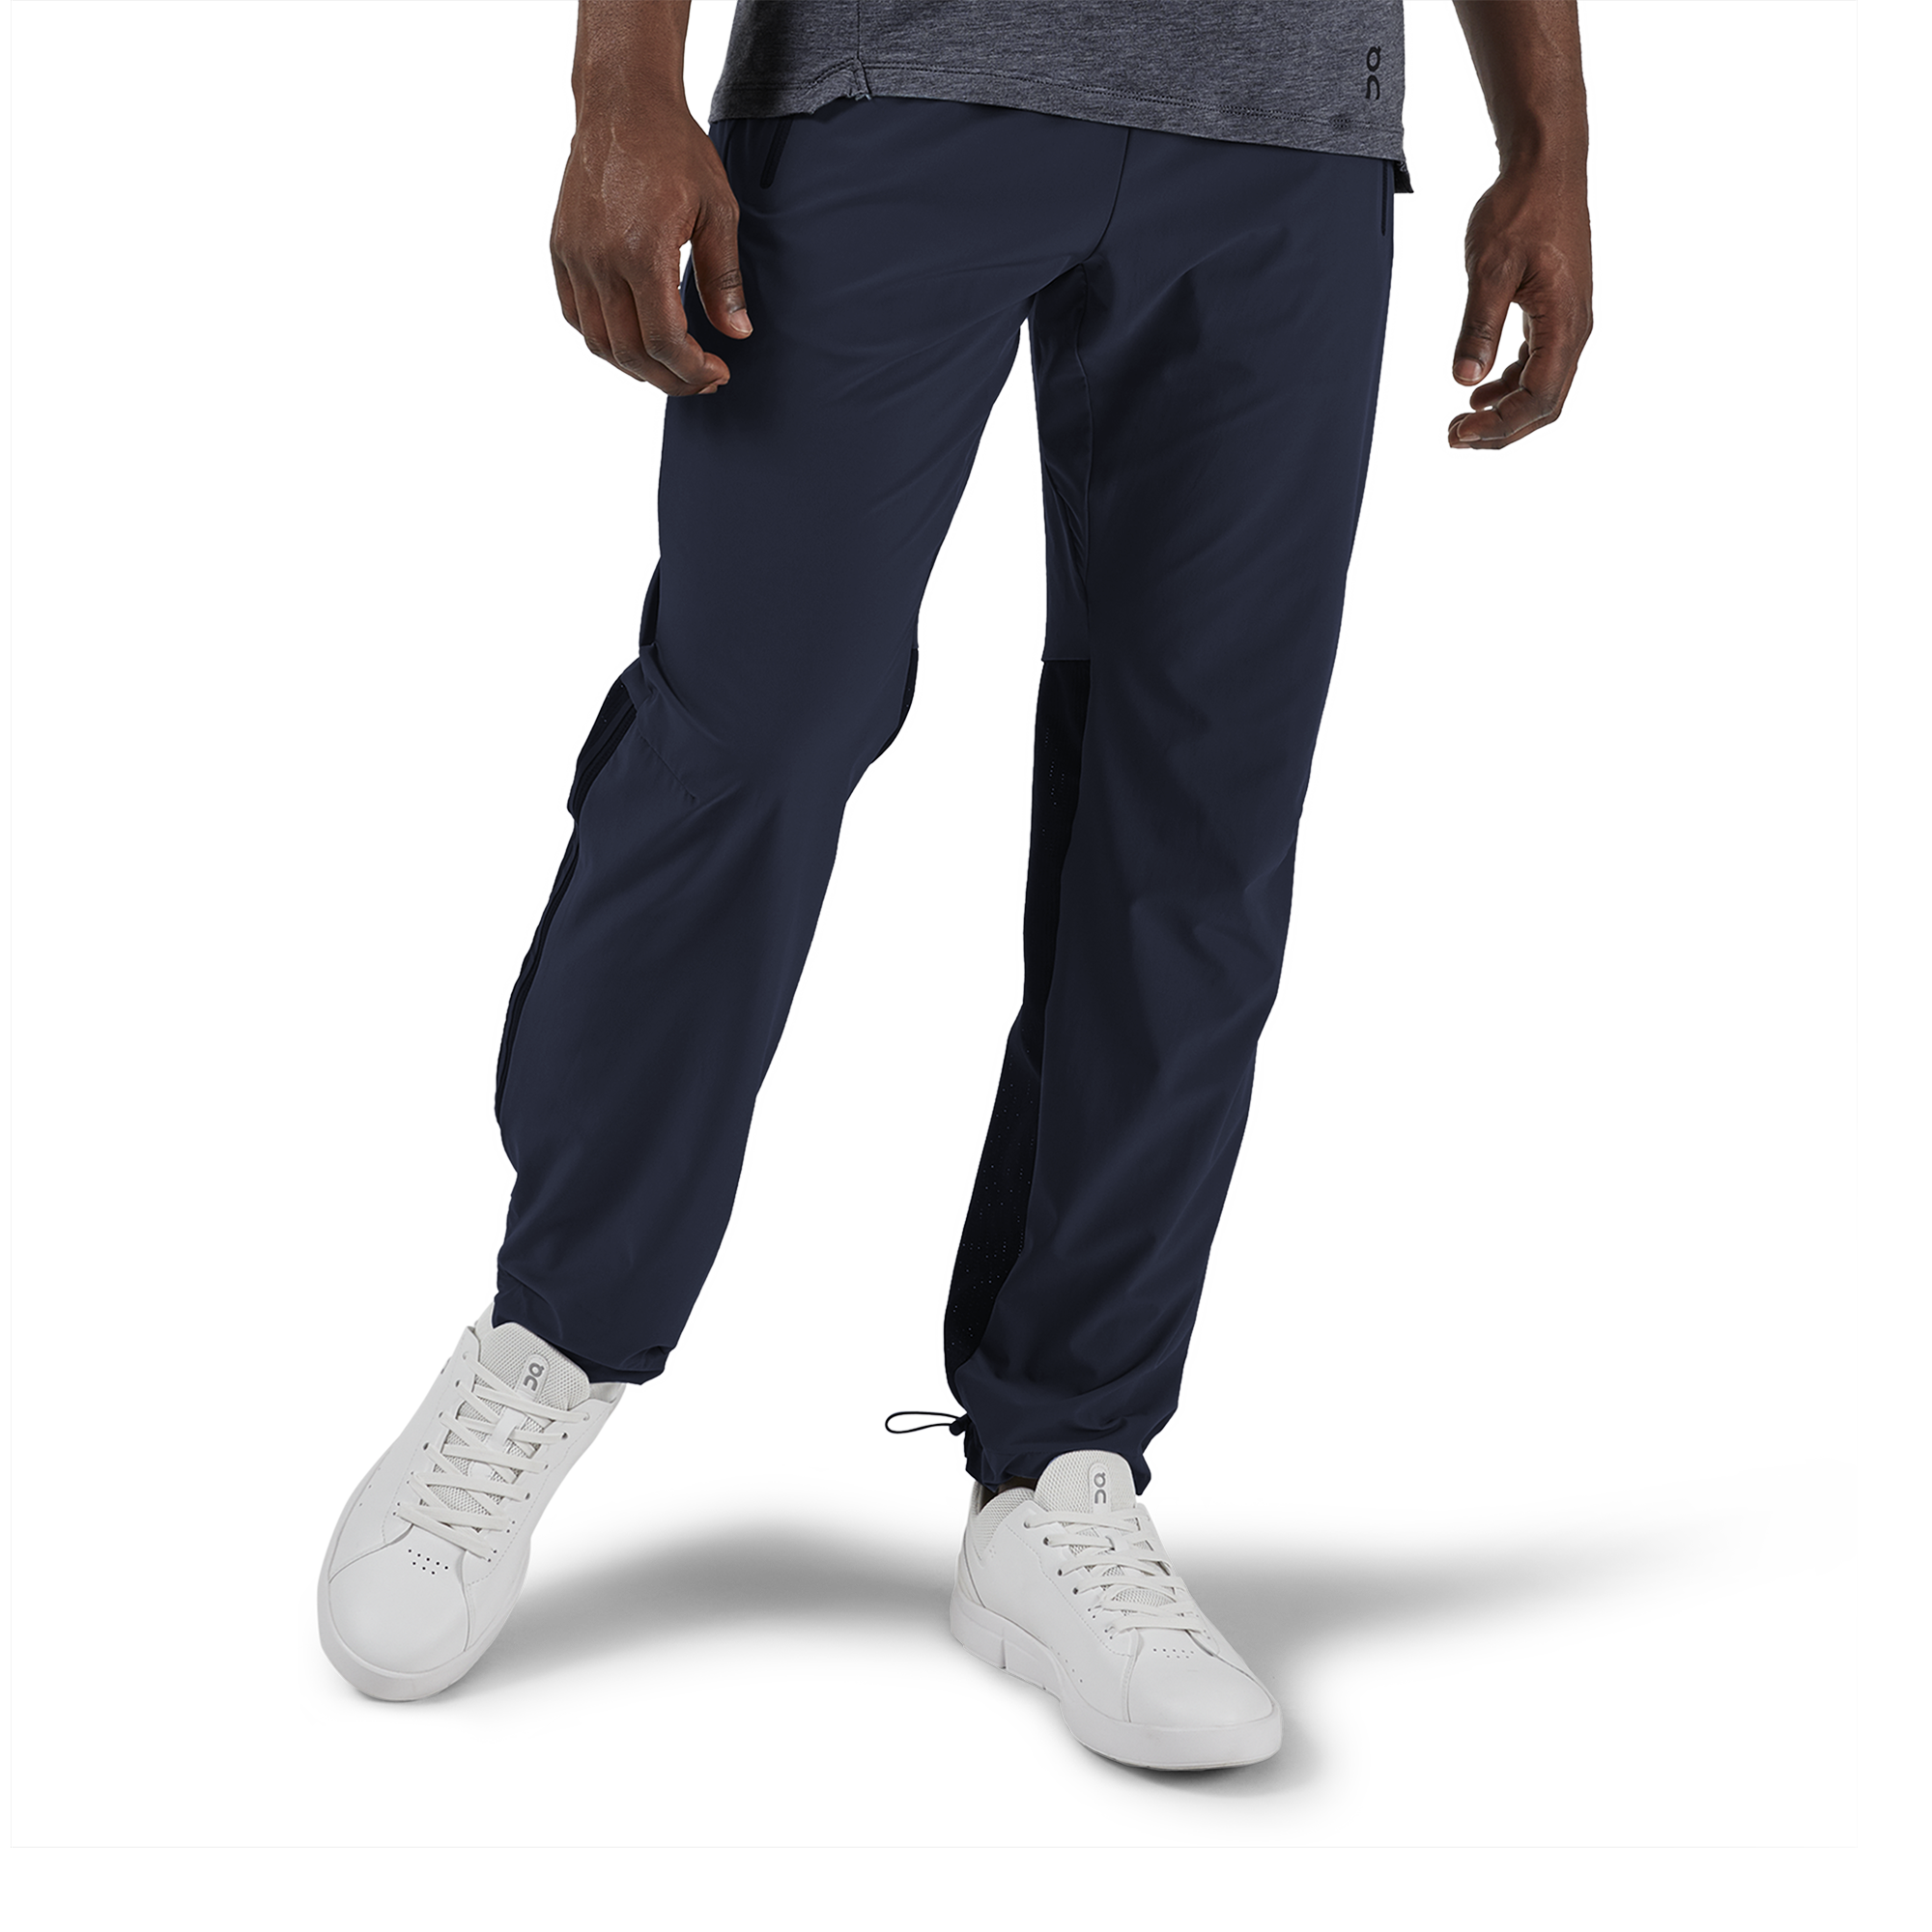  Men's Workout Athletic Pants Elastic Waist Jogging Running Pants  for Men with Pockets, Fishing Travel Hiking Joggers Navy : Clothing, Shoes  & Jewelry